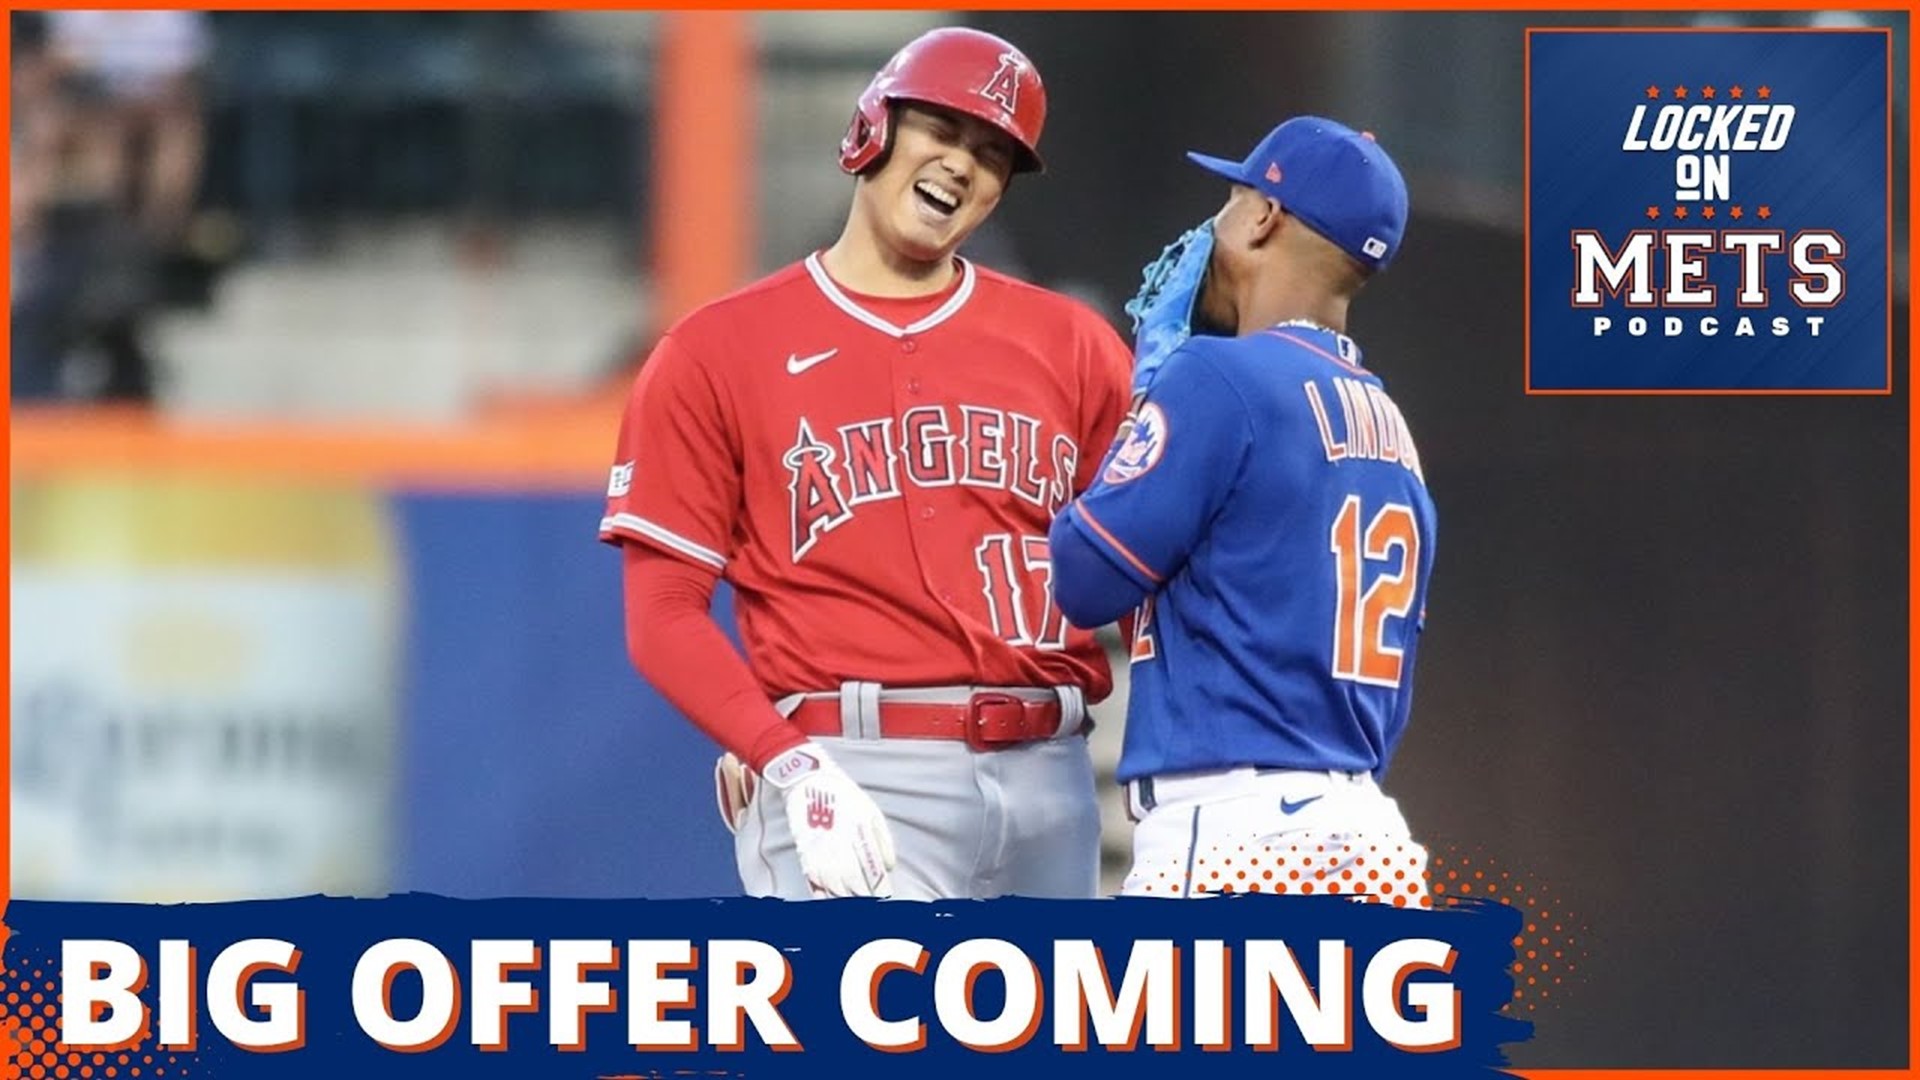 Could Shohei Ohtani Be the New York Mets Babe Ruth?